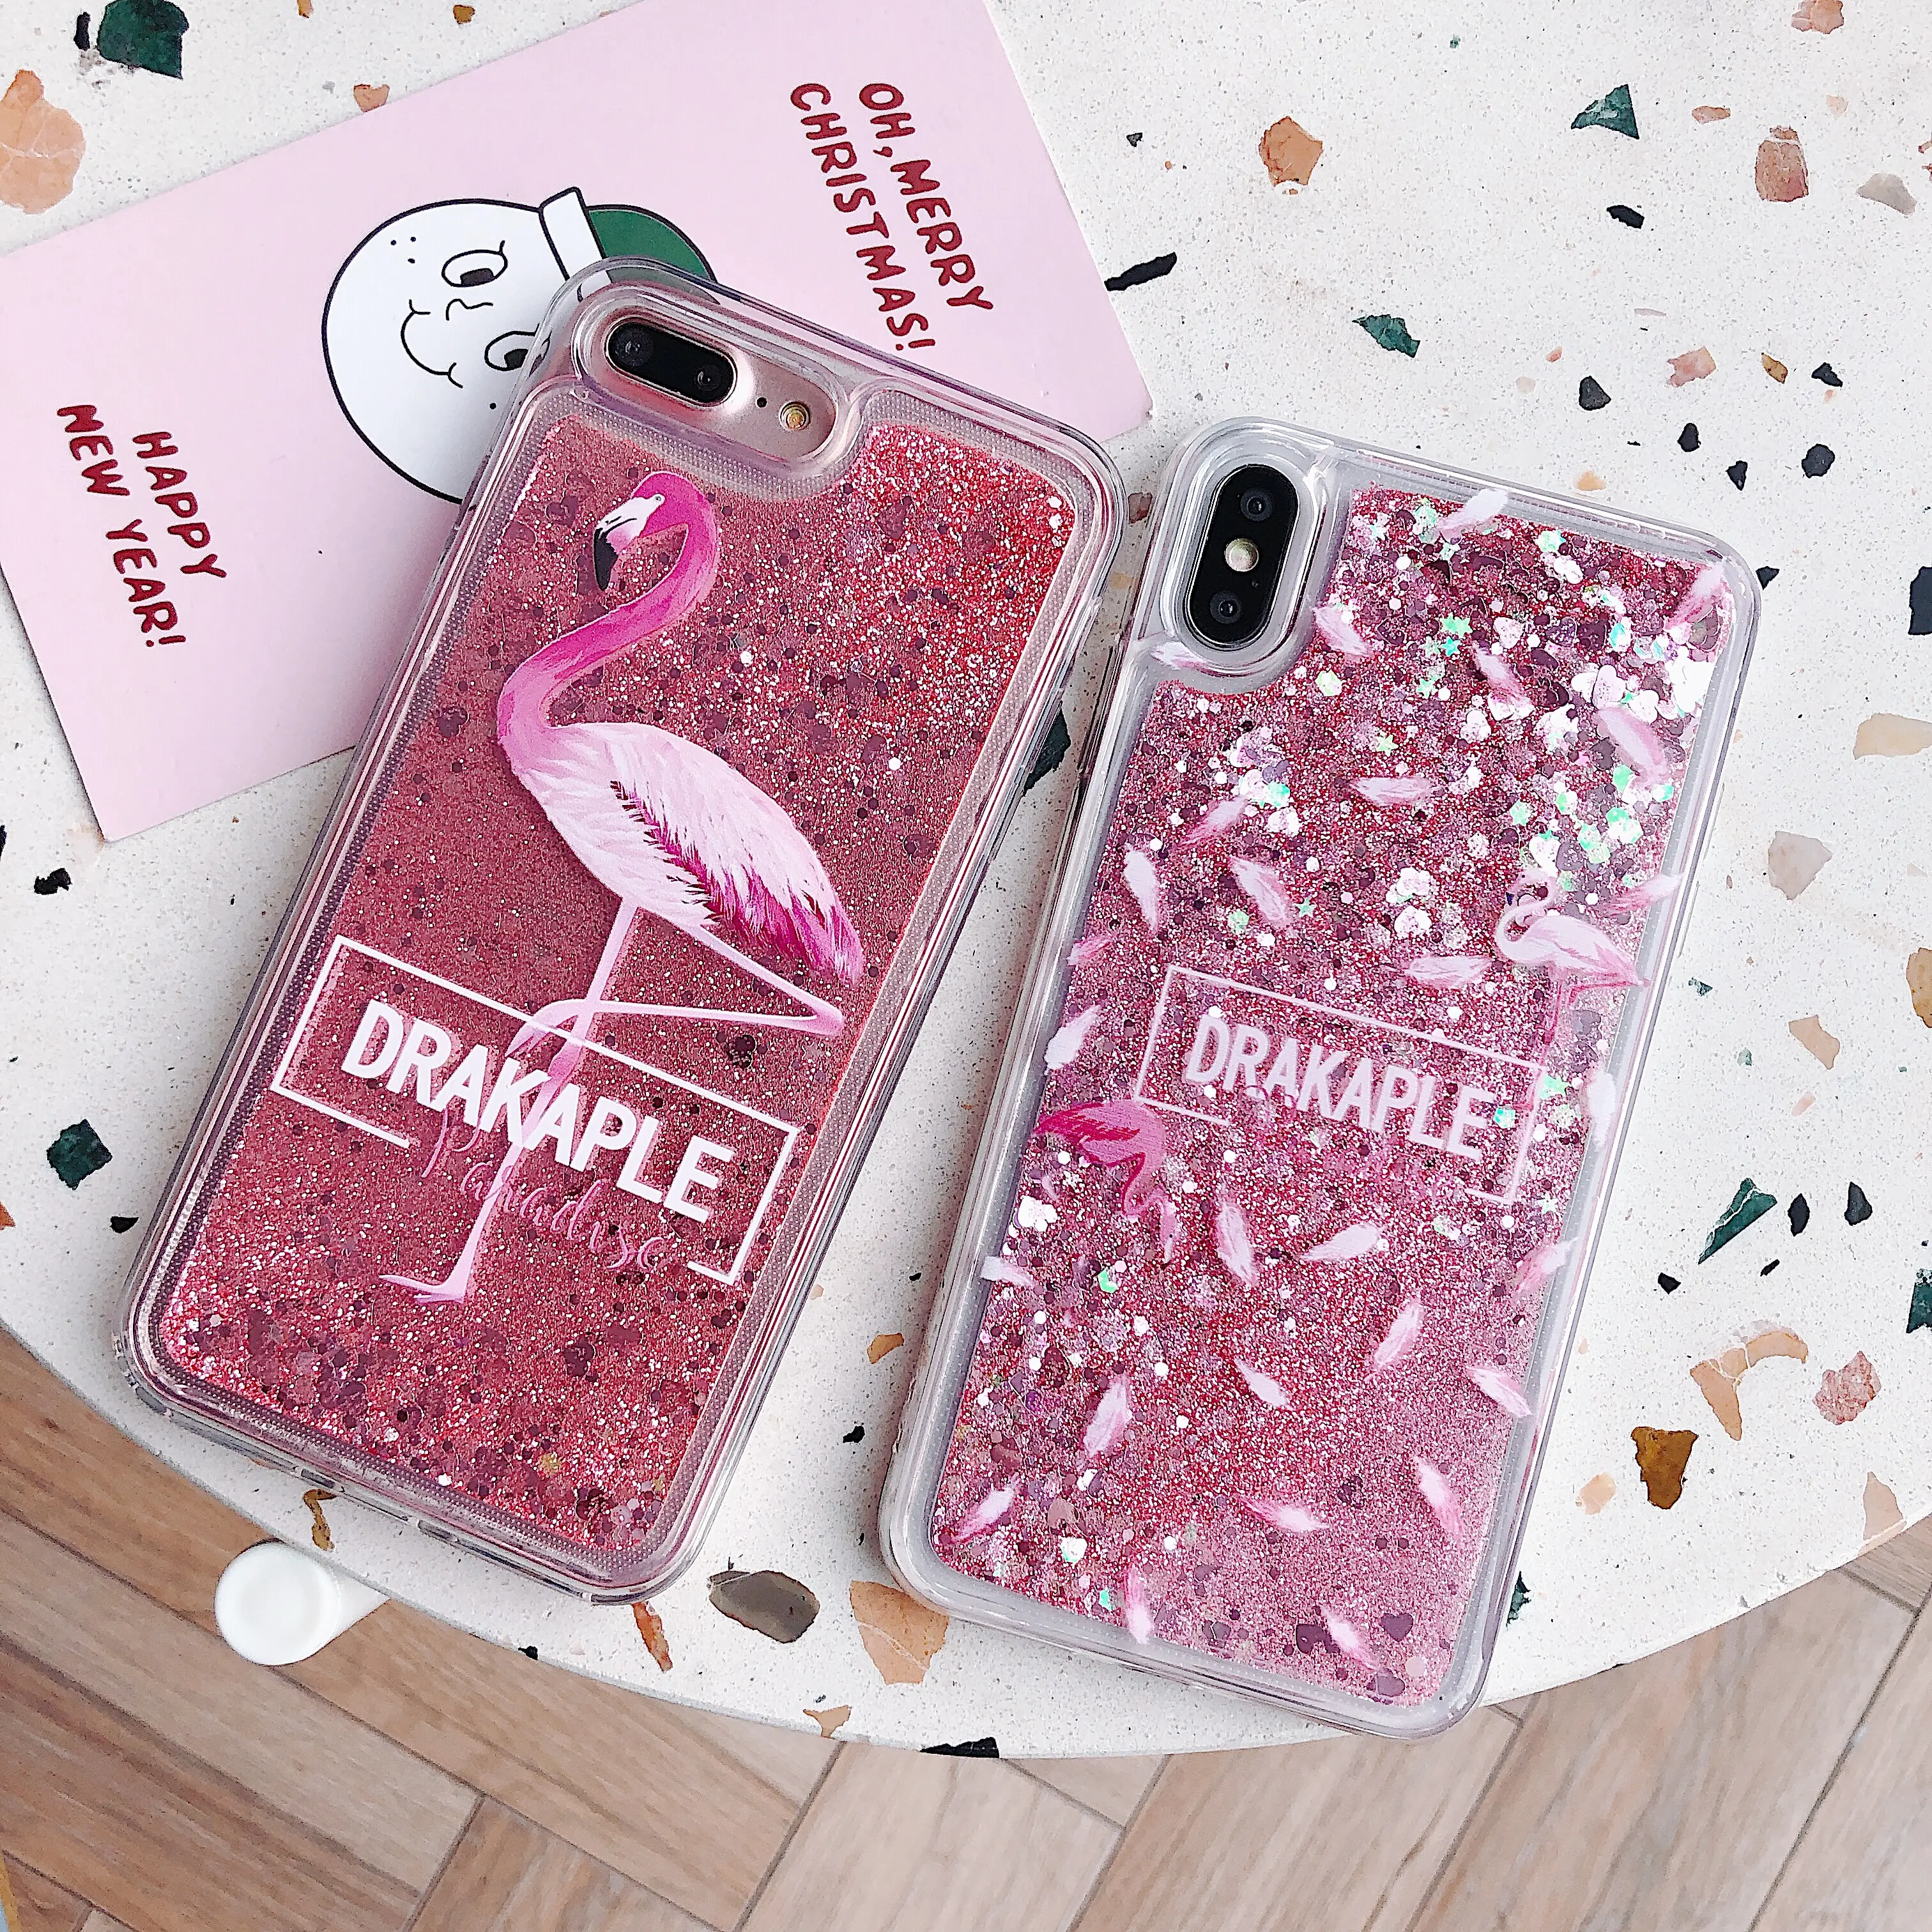 Girl Glitter Liquid Case For iPhone 11 11 Pro Max, Lovely Flamingo Pattern Soft Tpu Phone Case for iPhone 5 6 7 8 Plus Xr Xs Max